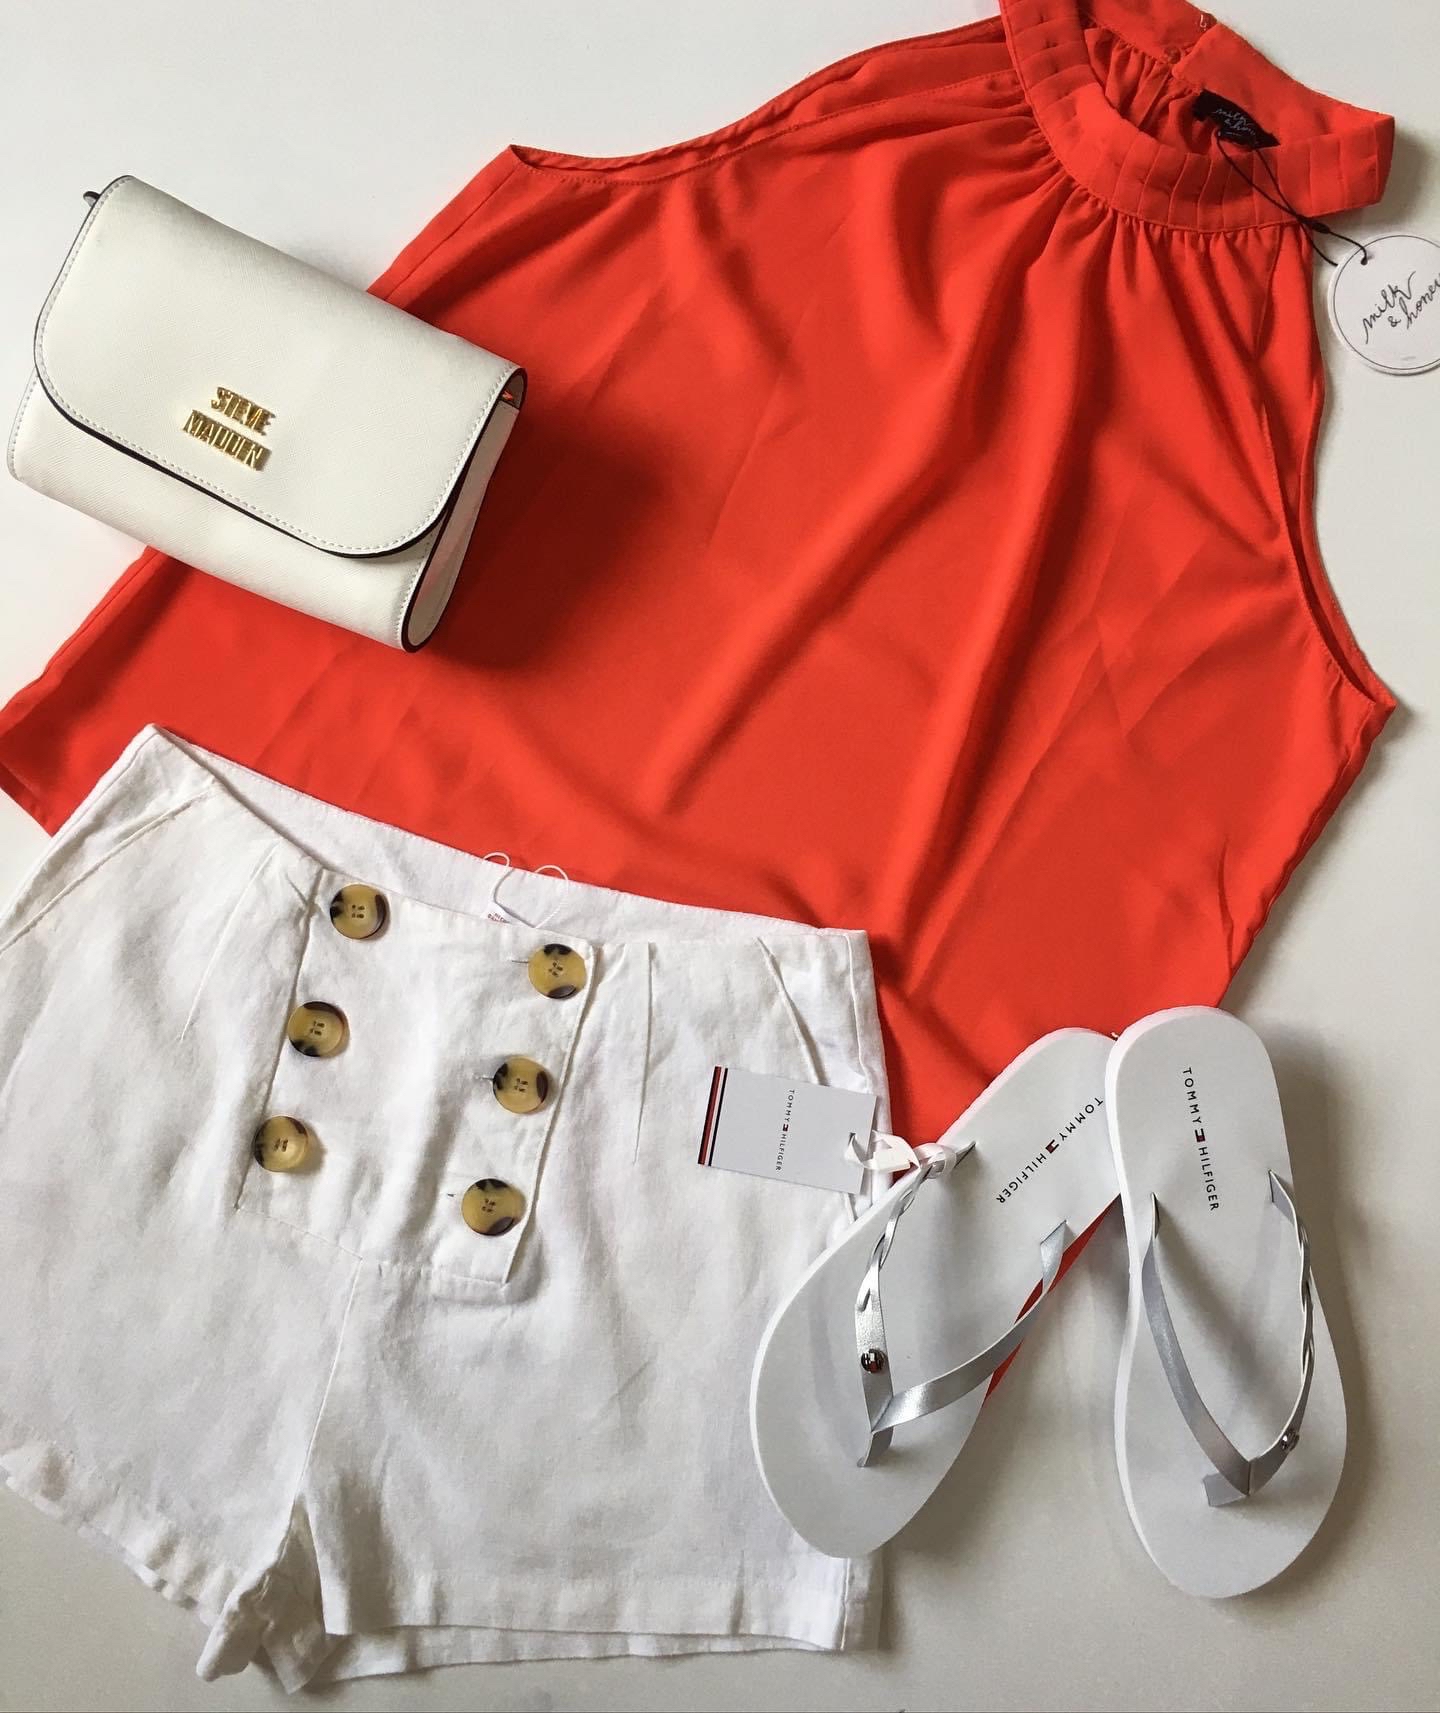 Perfect outfit for warm evenings by the beach 